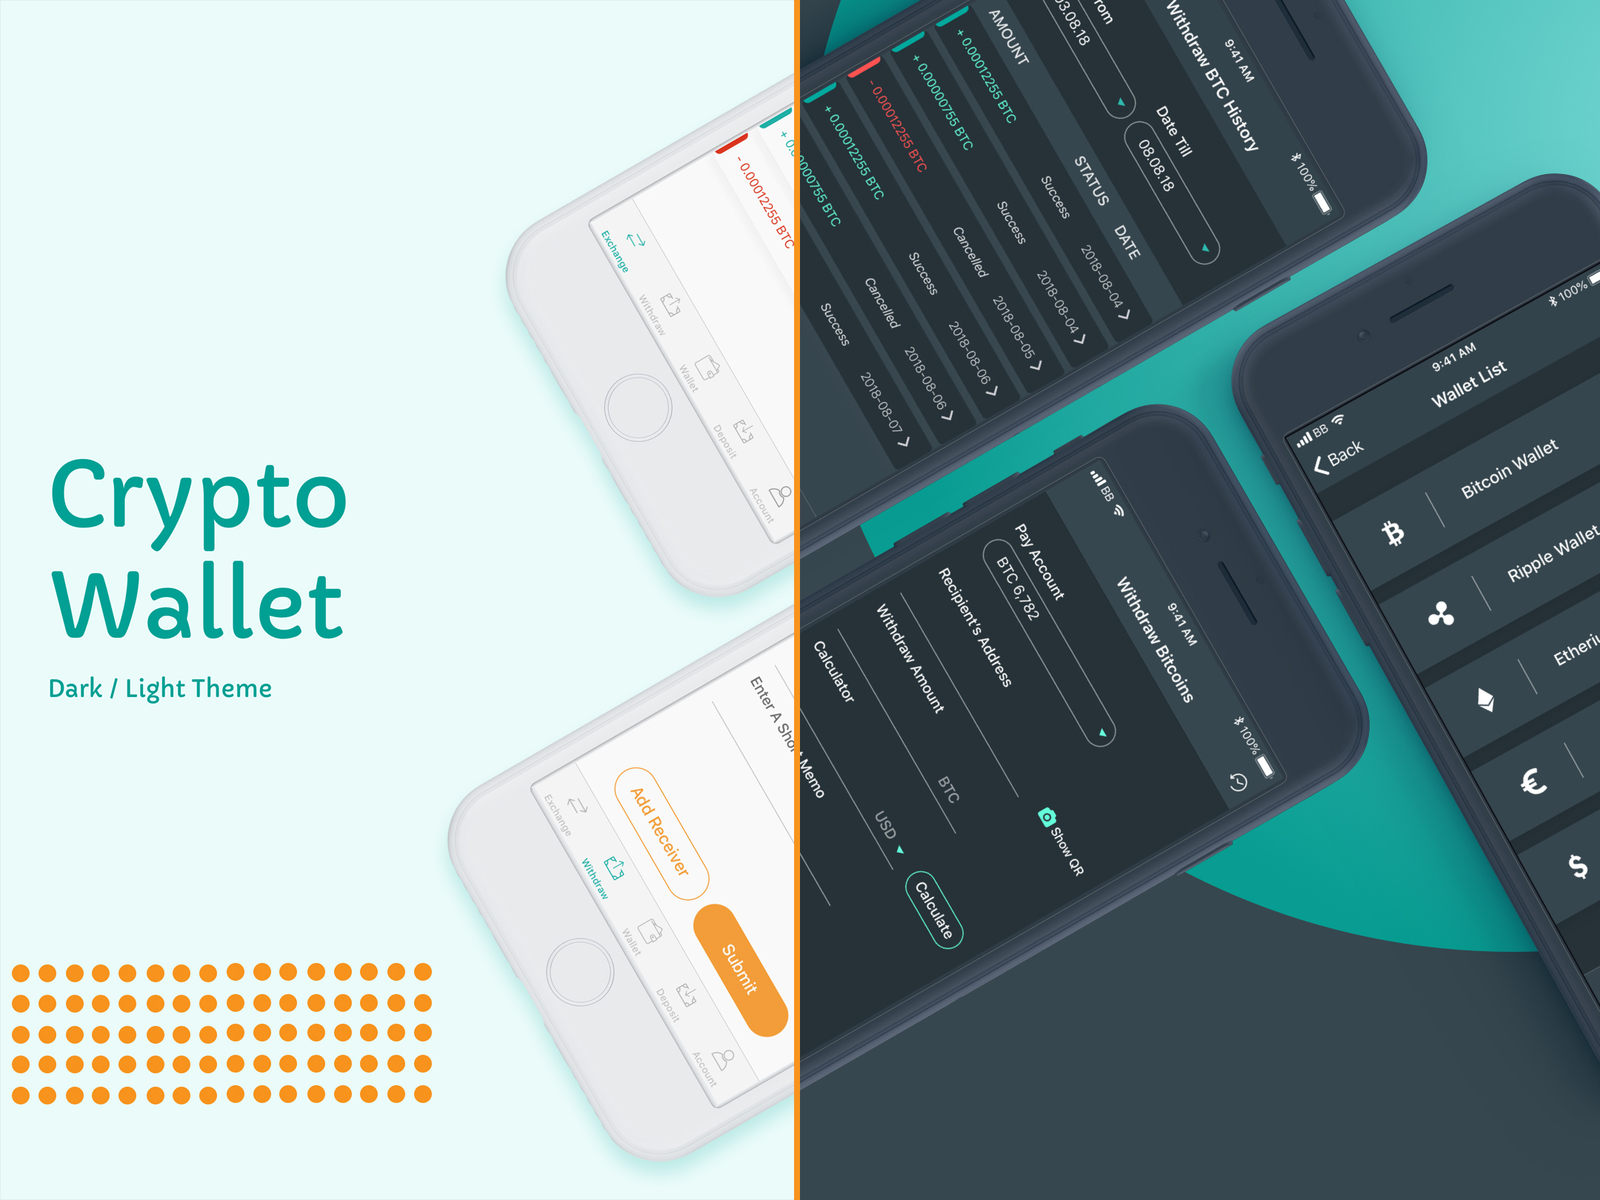 1 wallet for all cryptocurrencies